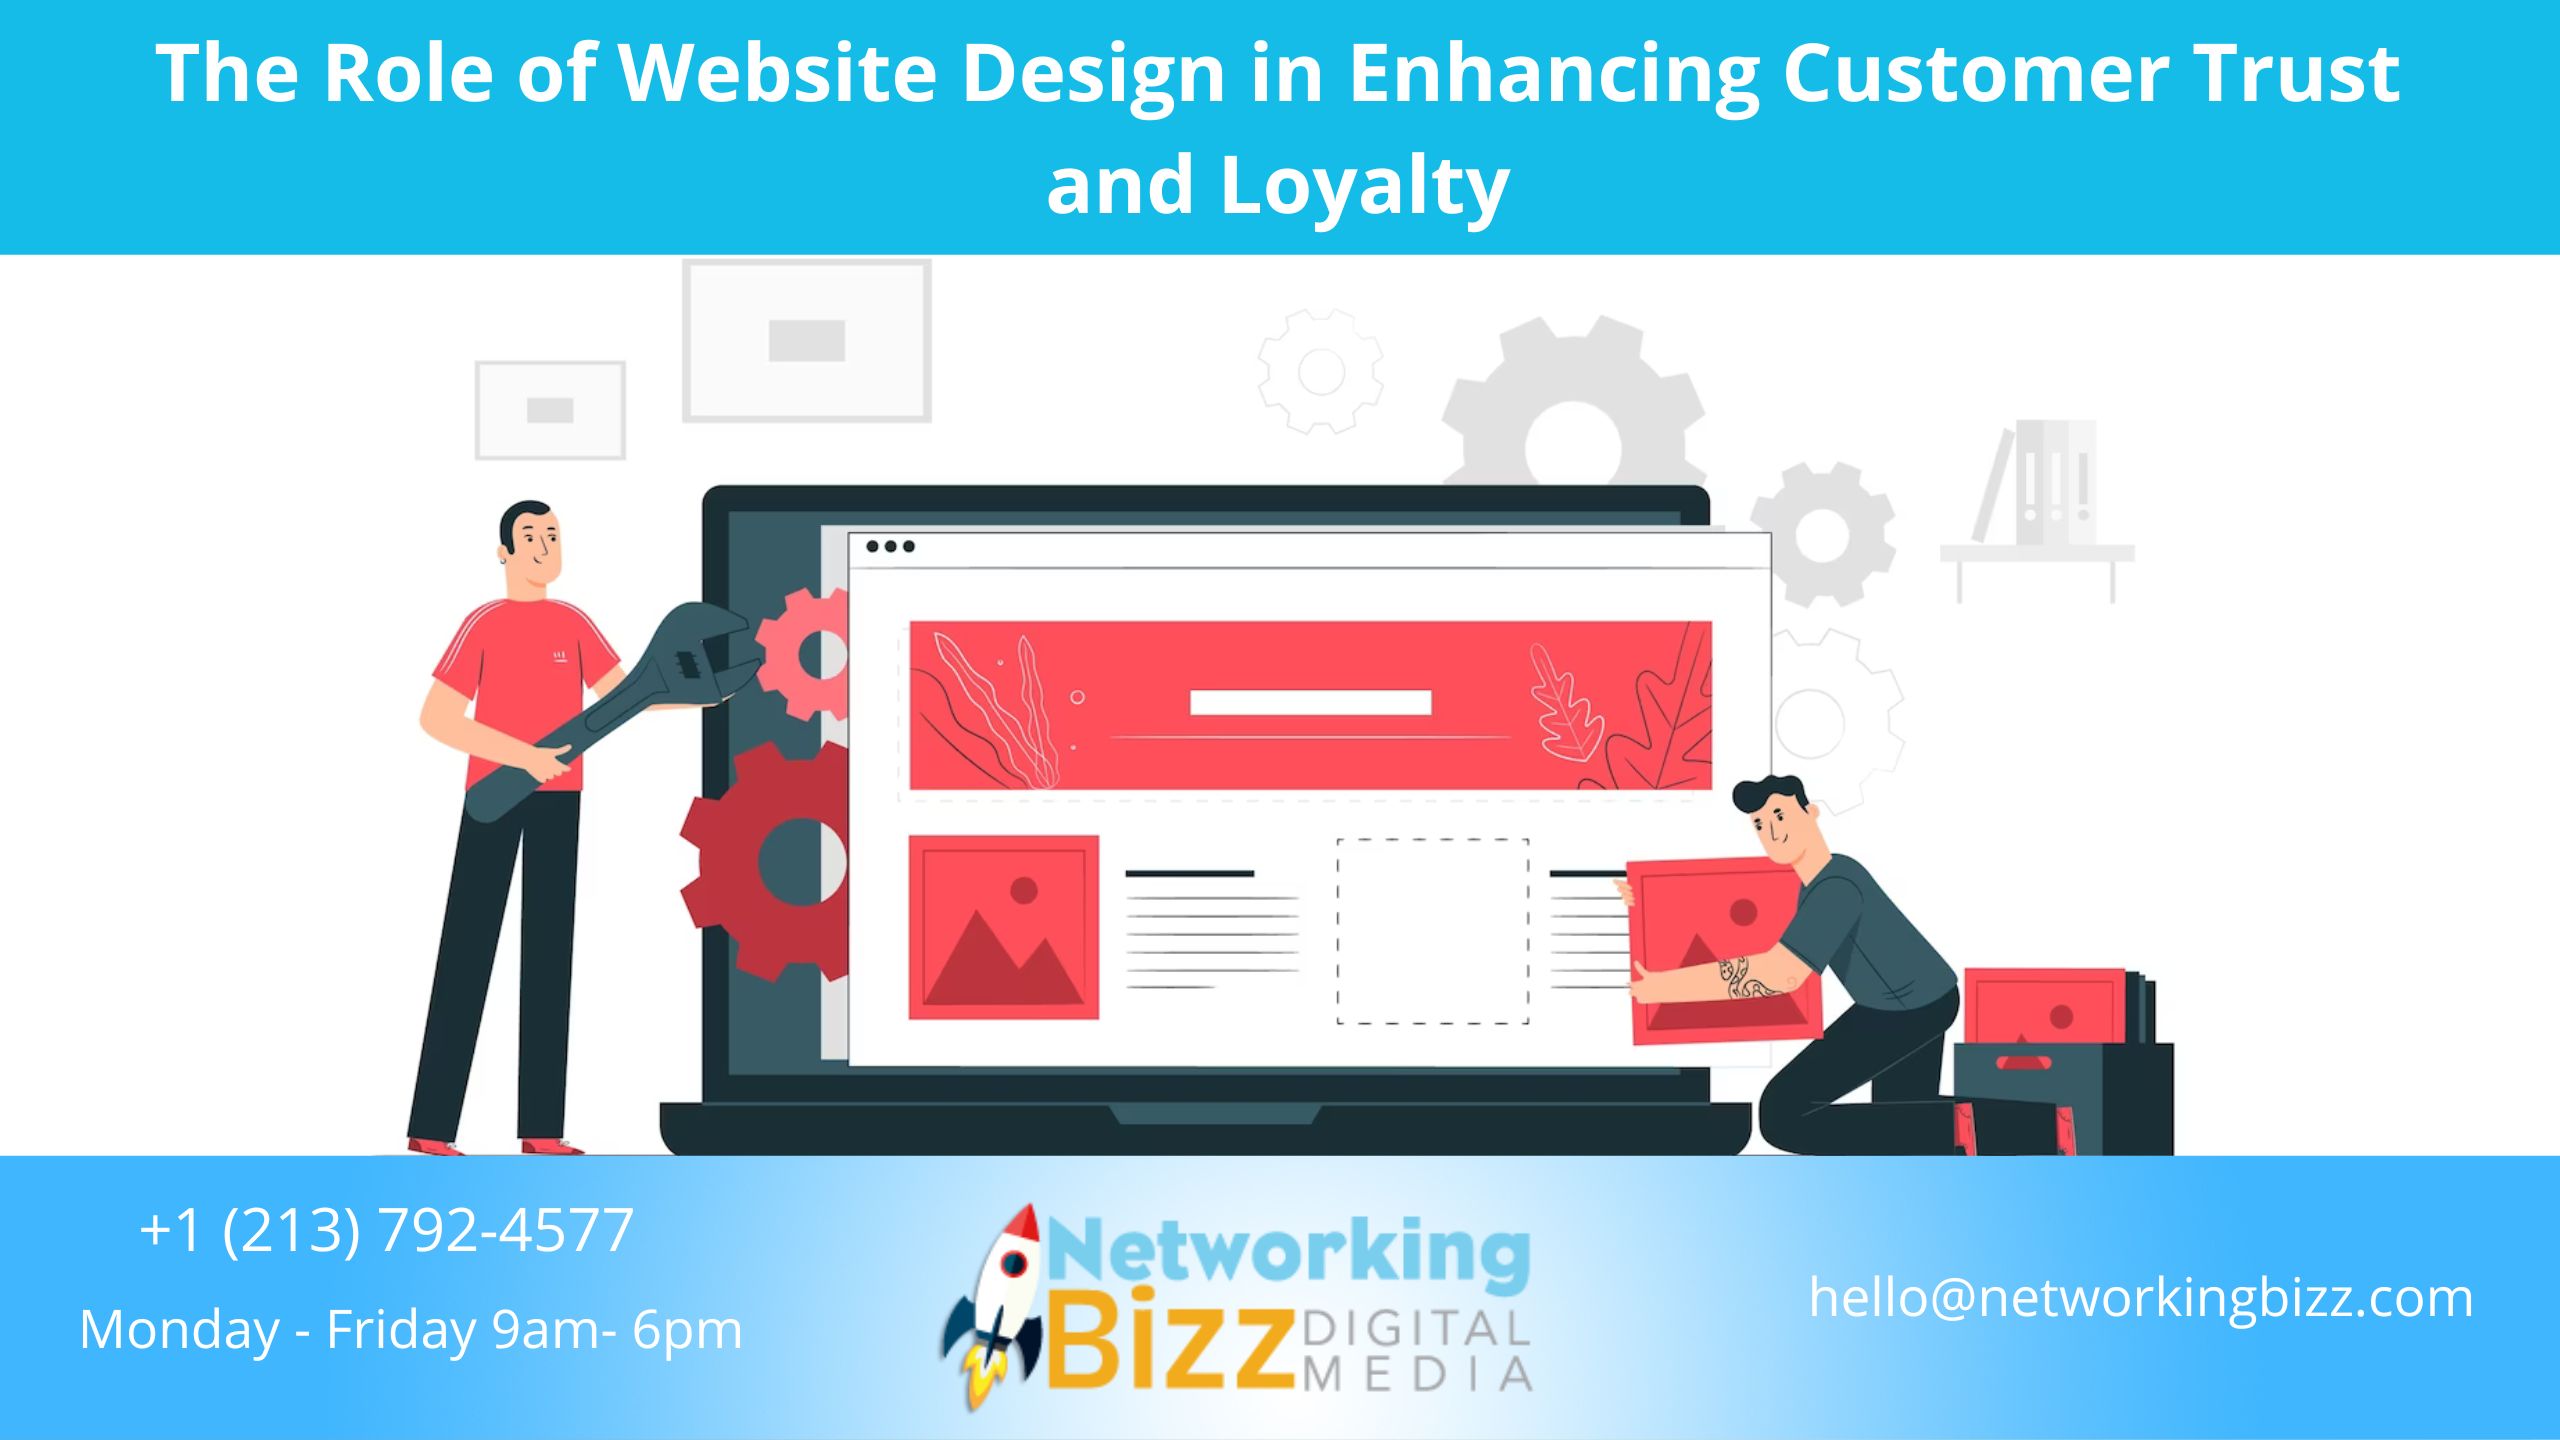 The Role of Website Design in Enhancing Customer Trust and Loyalty